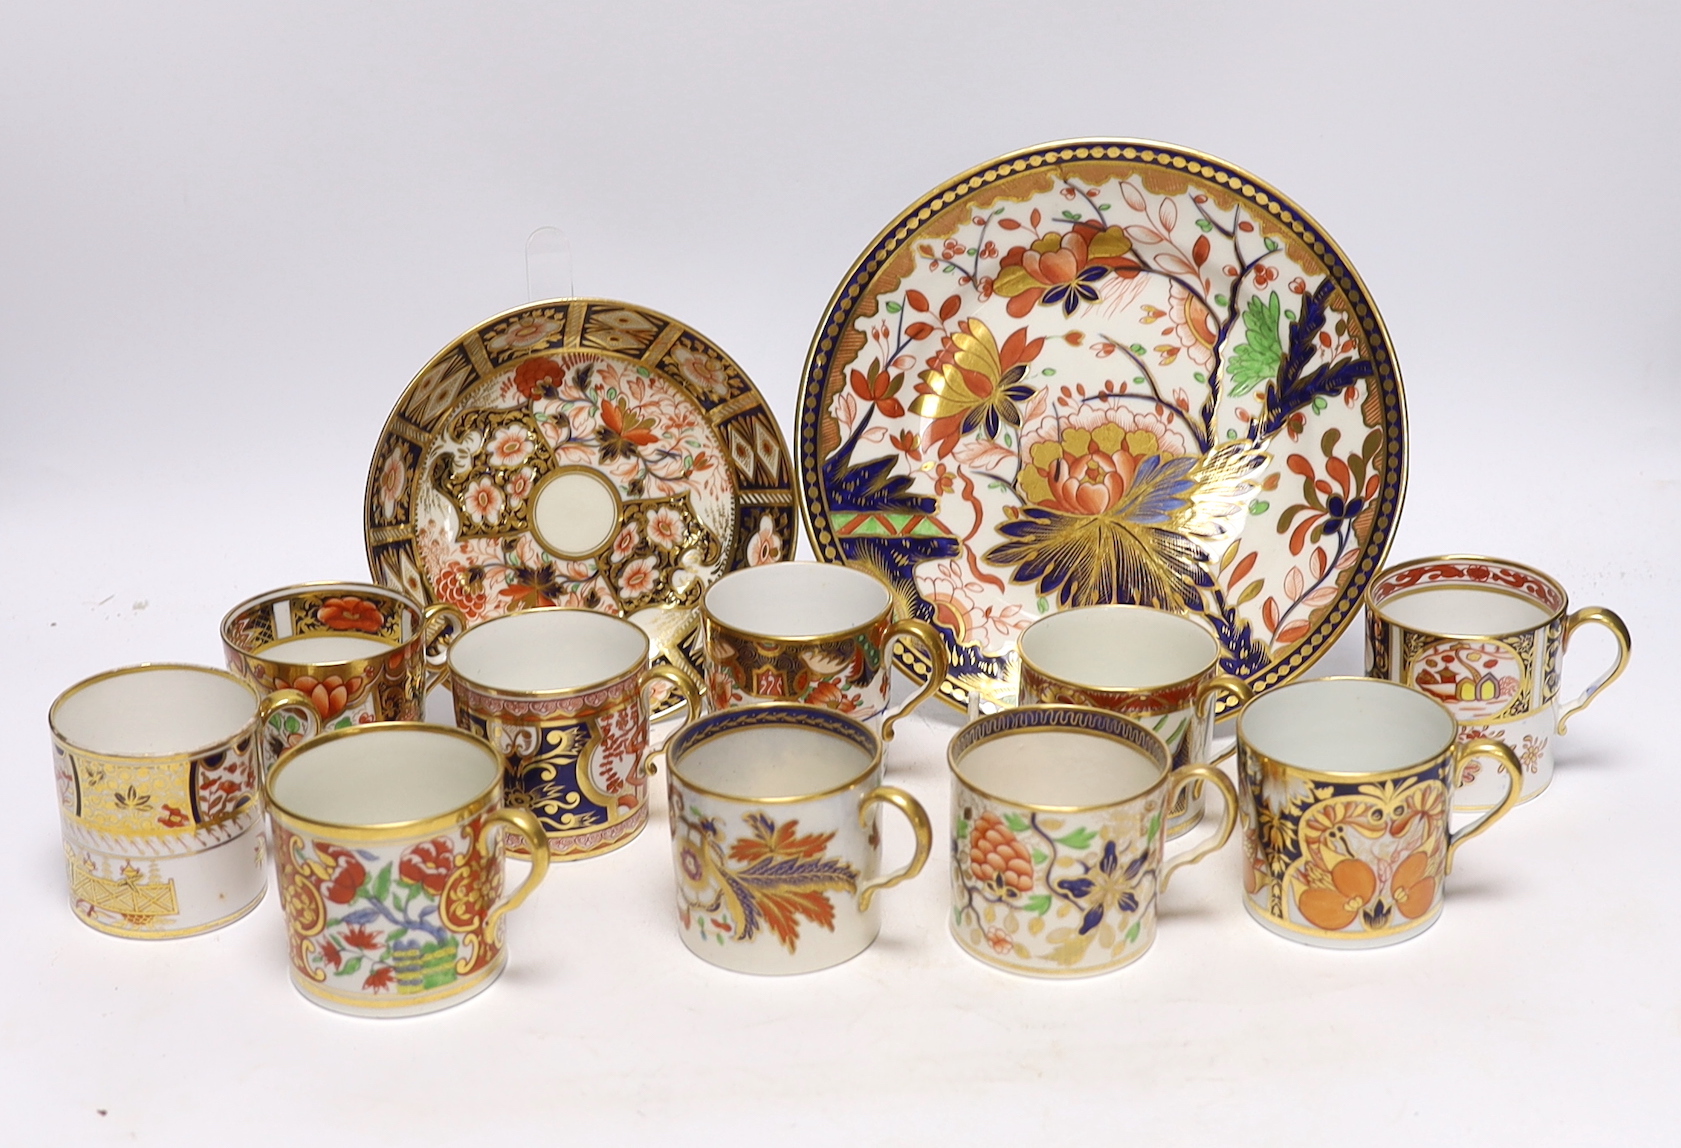 Ten 1800-1820 English porcelain coffee cans, including Imari pattern examples, one with matching saucer, together with a side plate (12)